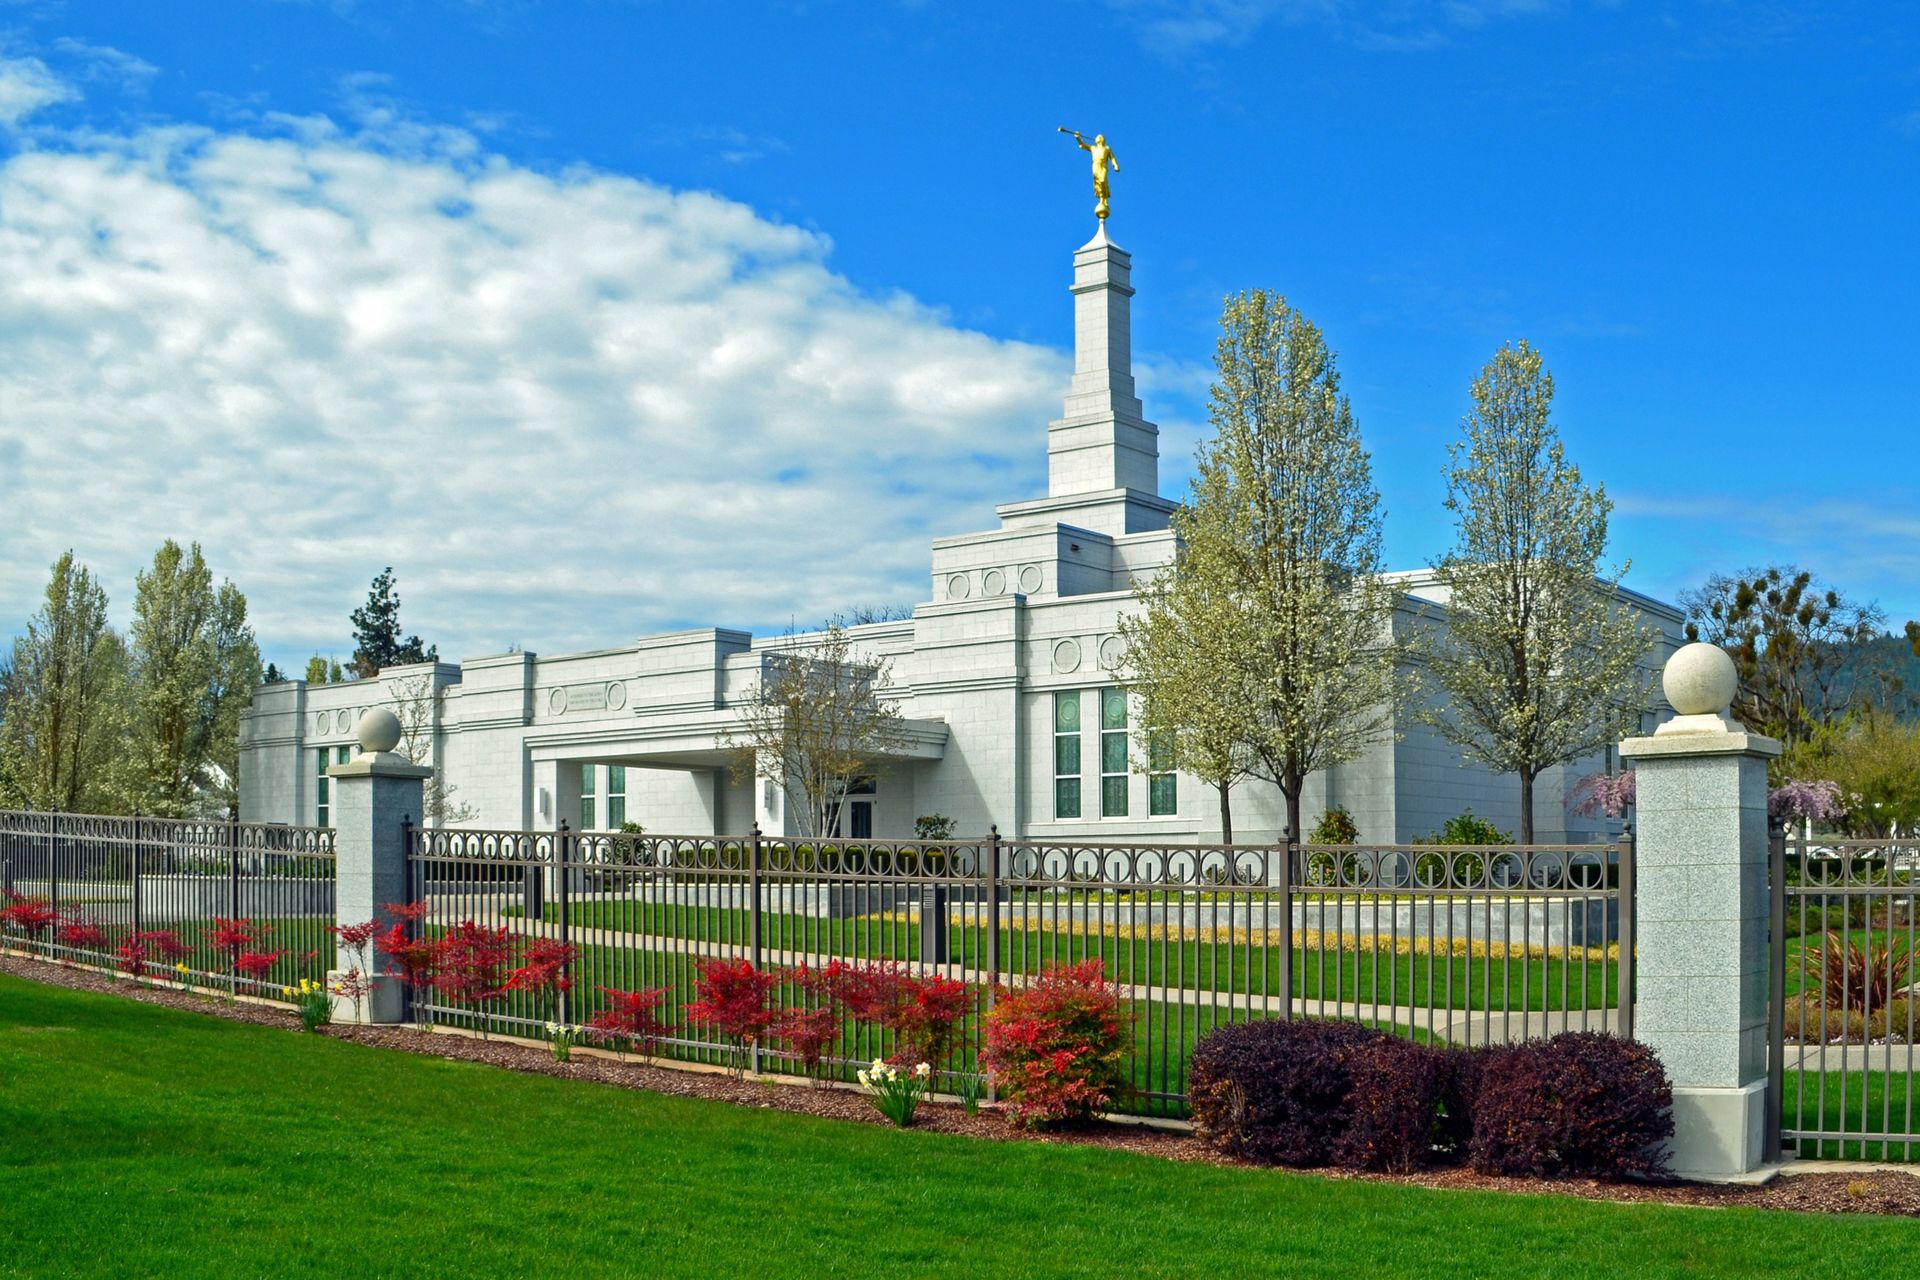 The Medford Oregon Temple, including the entrance and scenery.